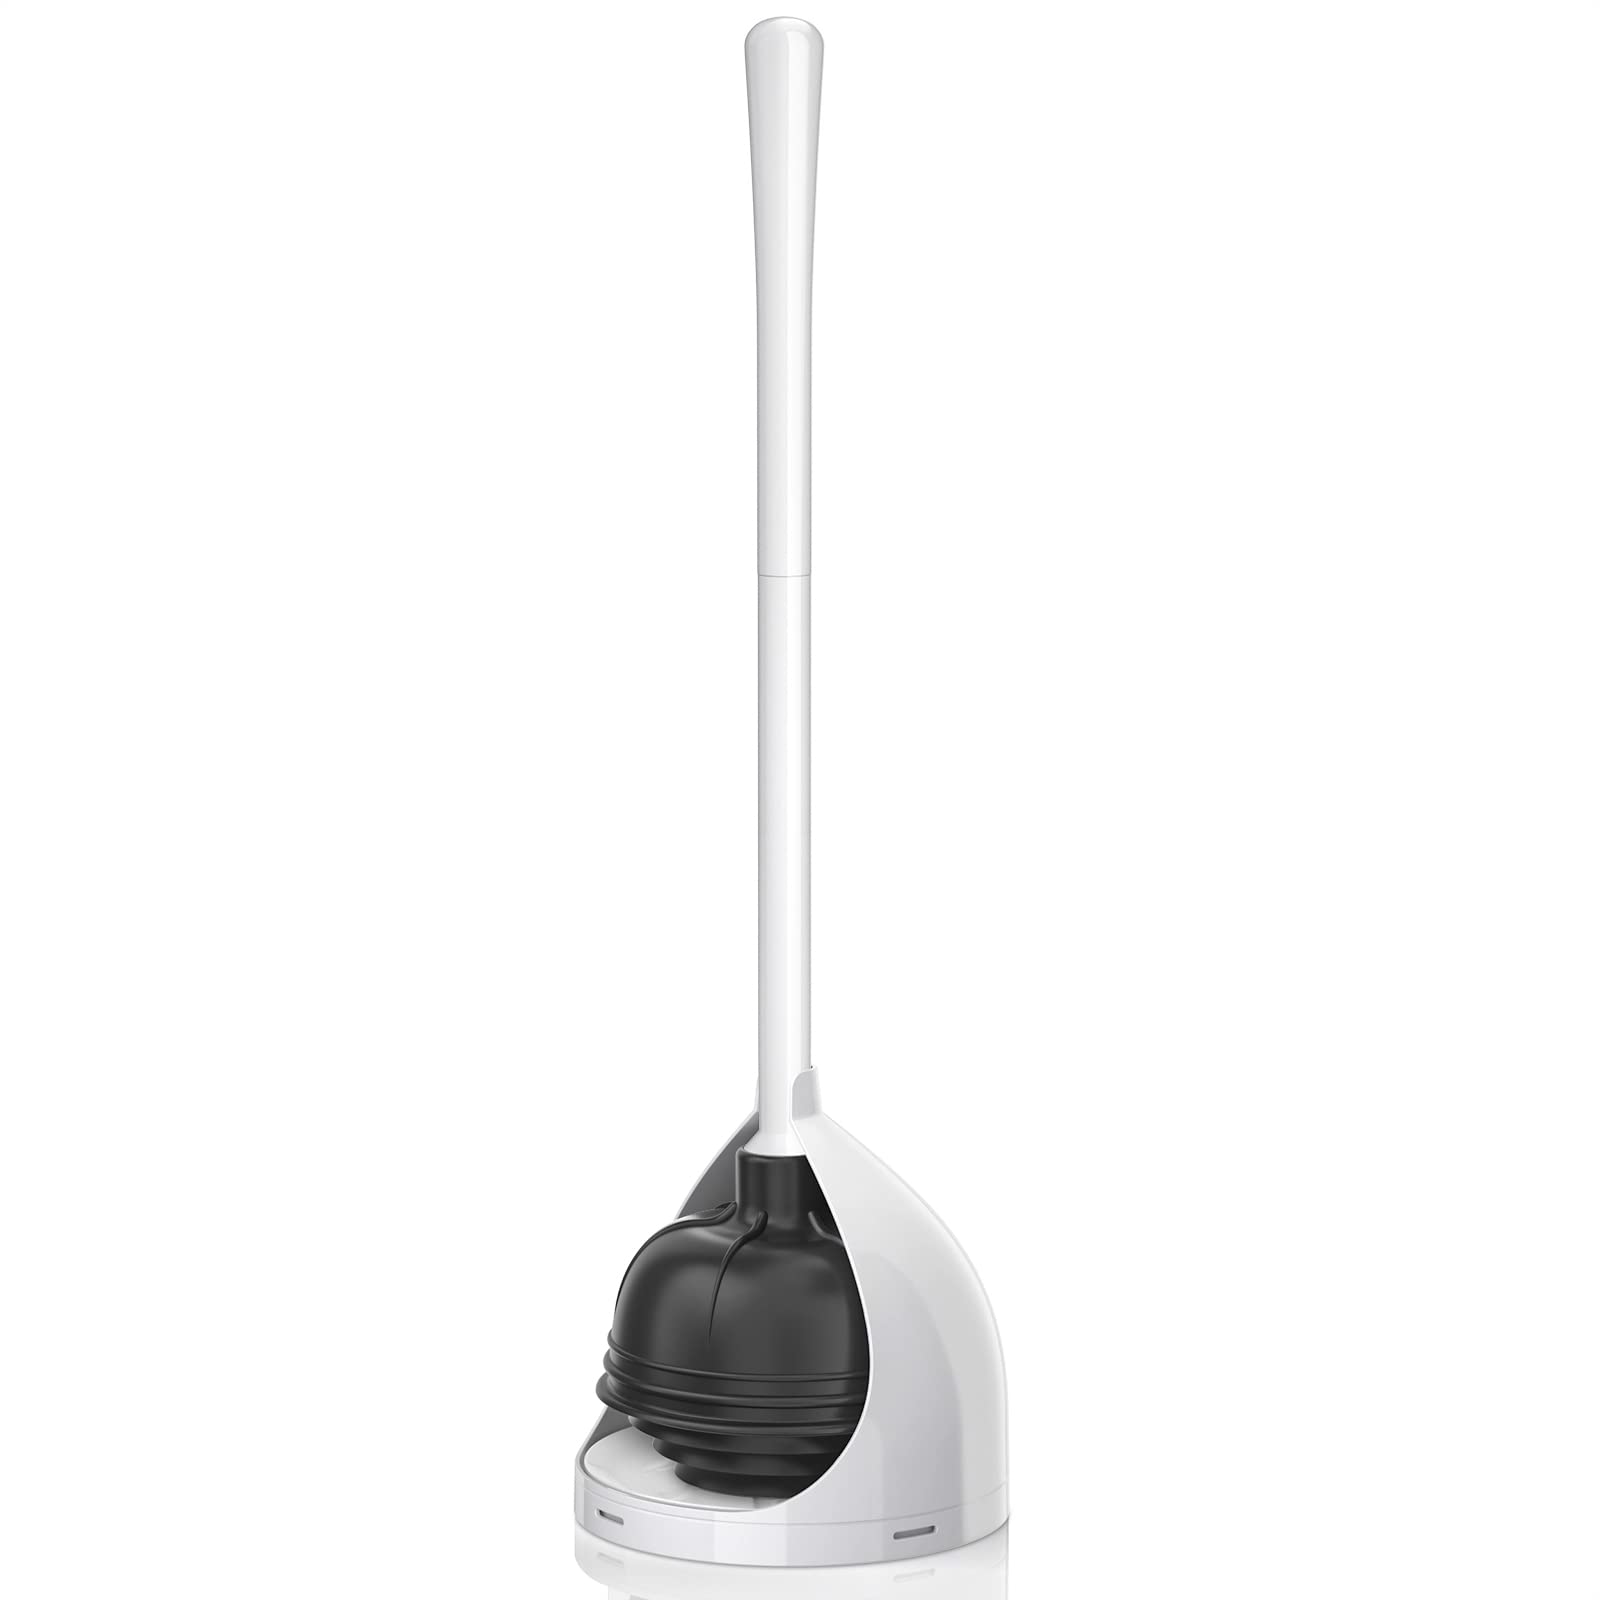 oxo good grips toilet plunger with holder, white 